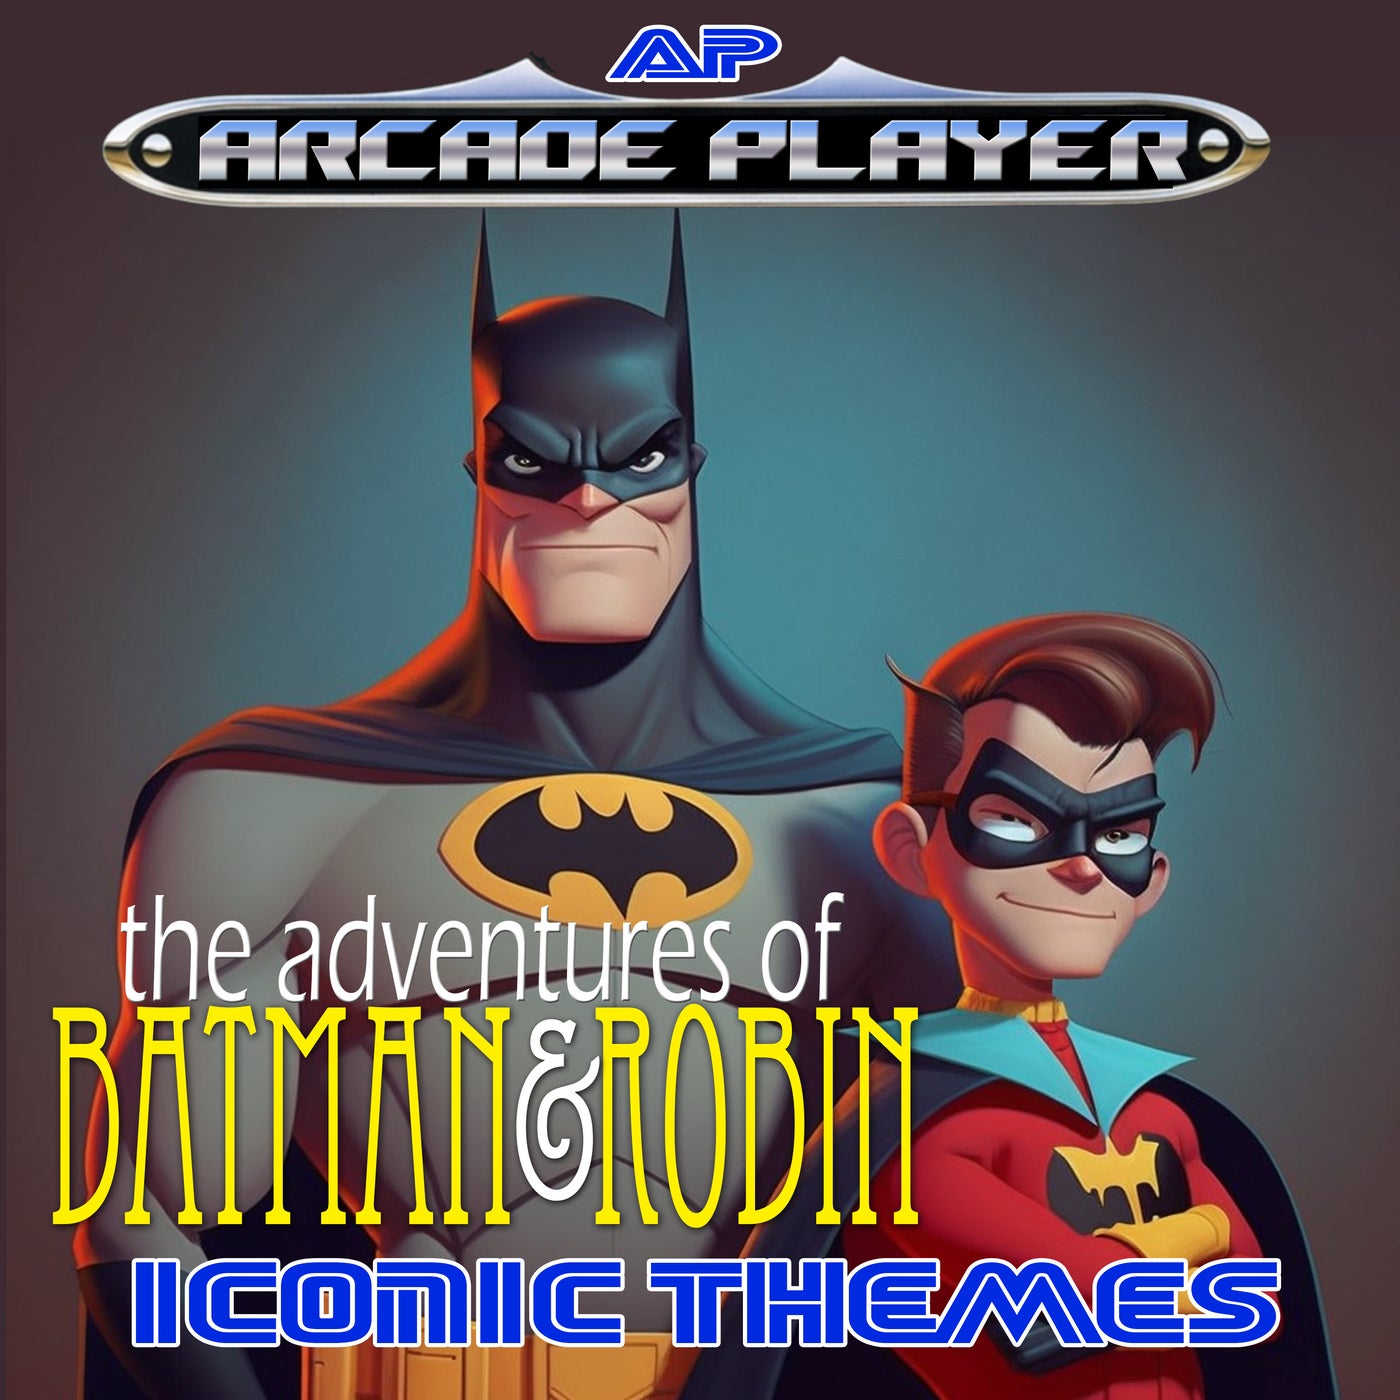 The Adventures of Batman & Robin: Iconic Themes by Arcade Player on  Beatsource